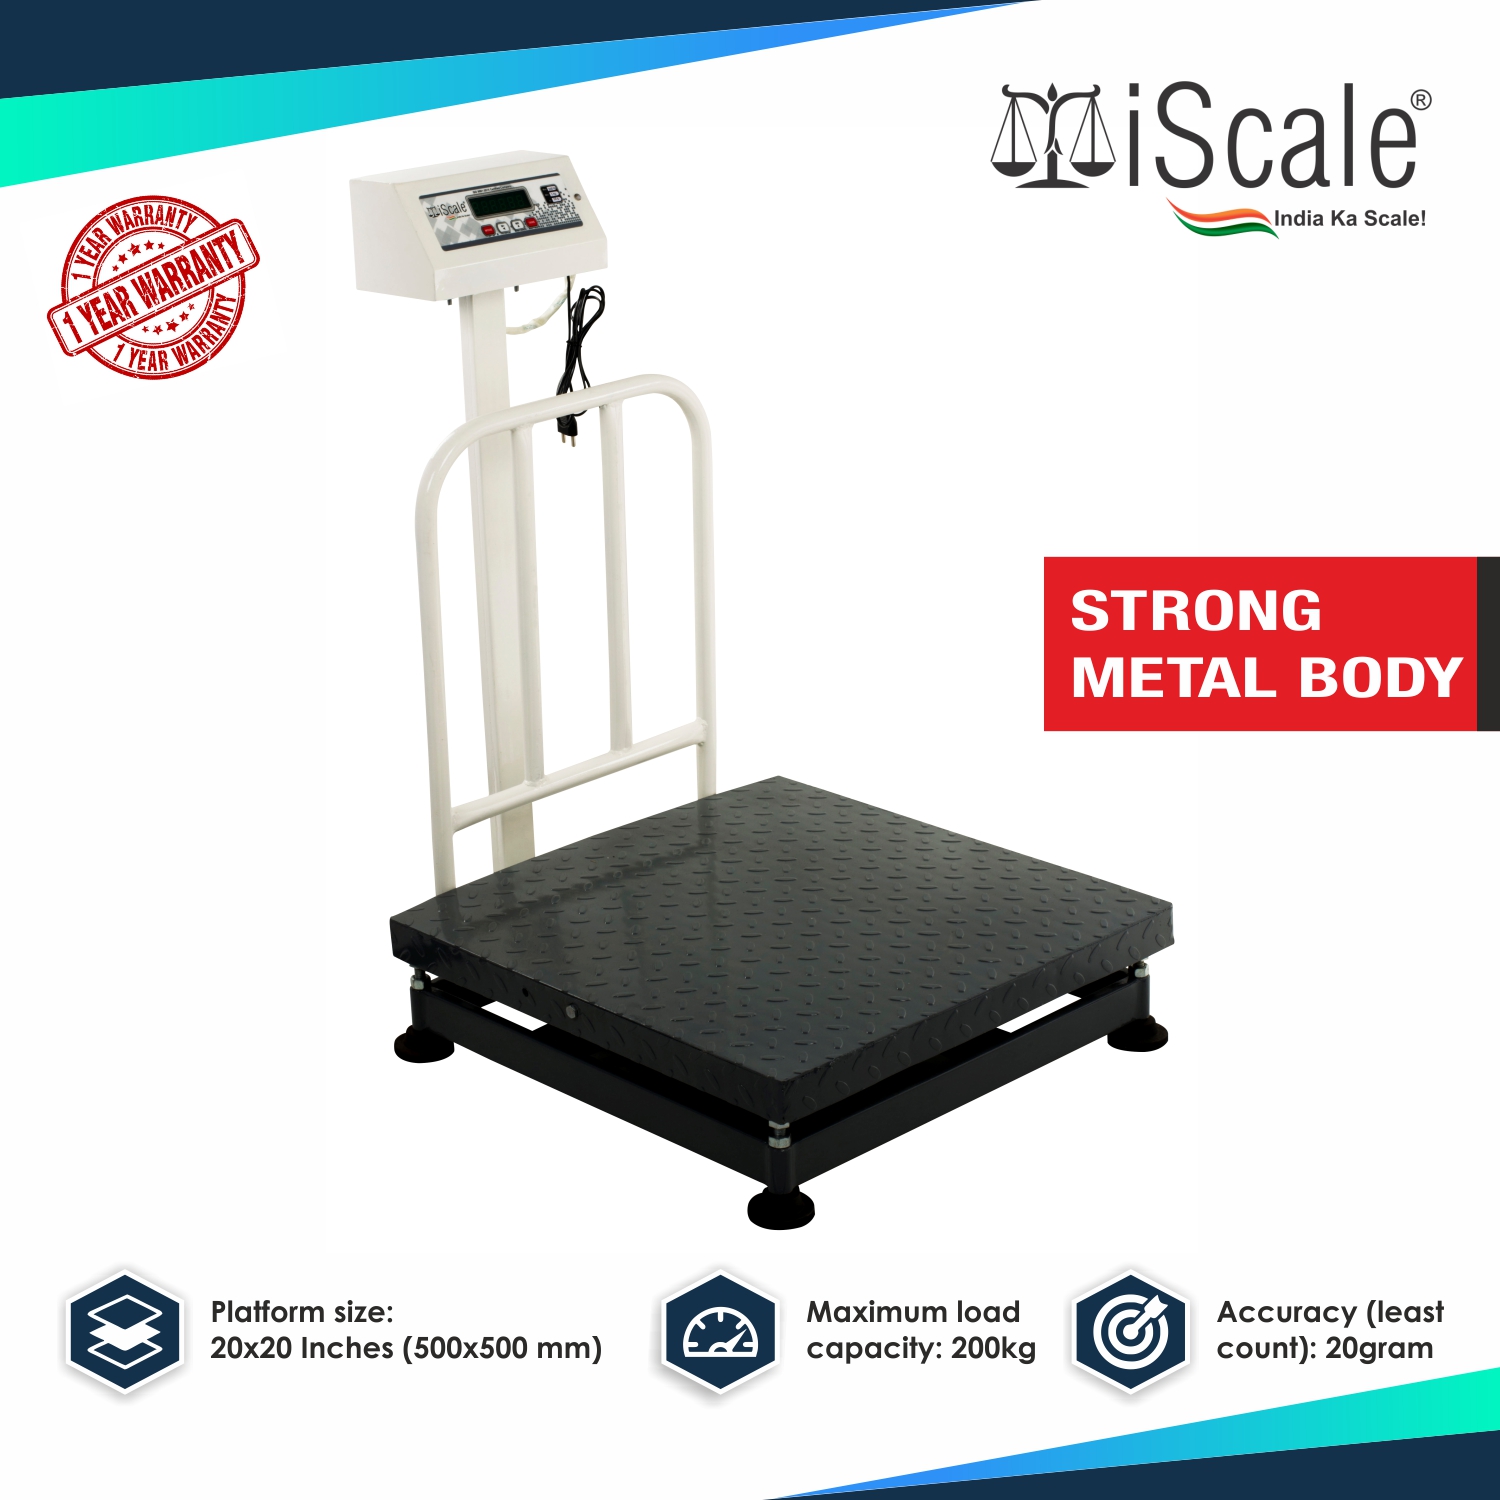 iScale 200kg heavy duty platform scale digital for shop and industry